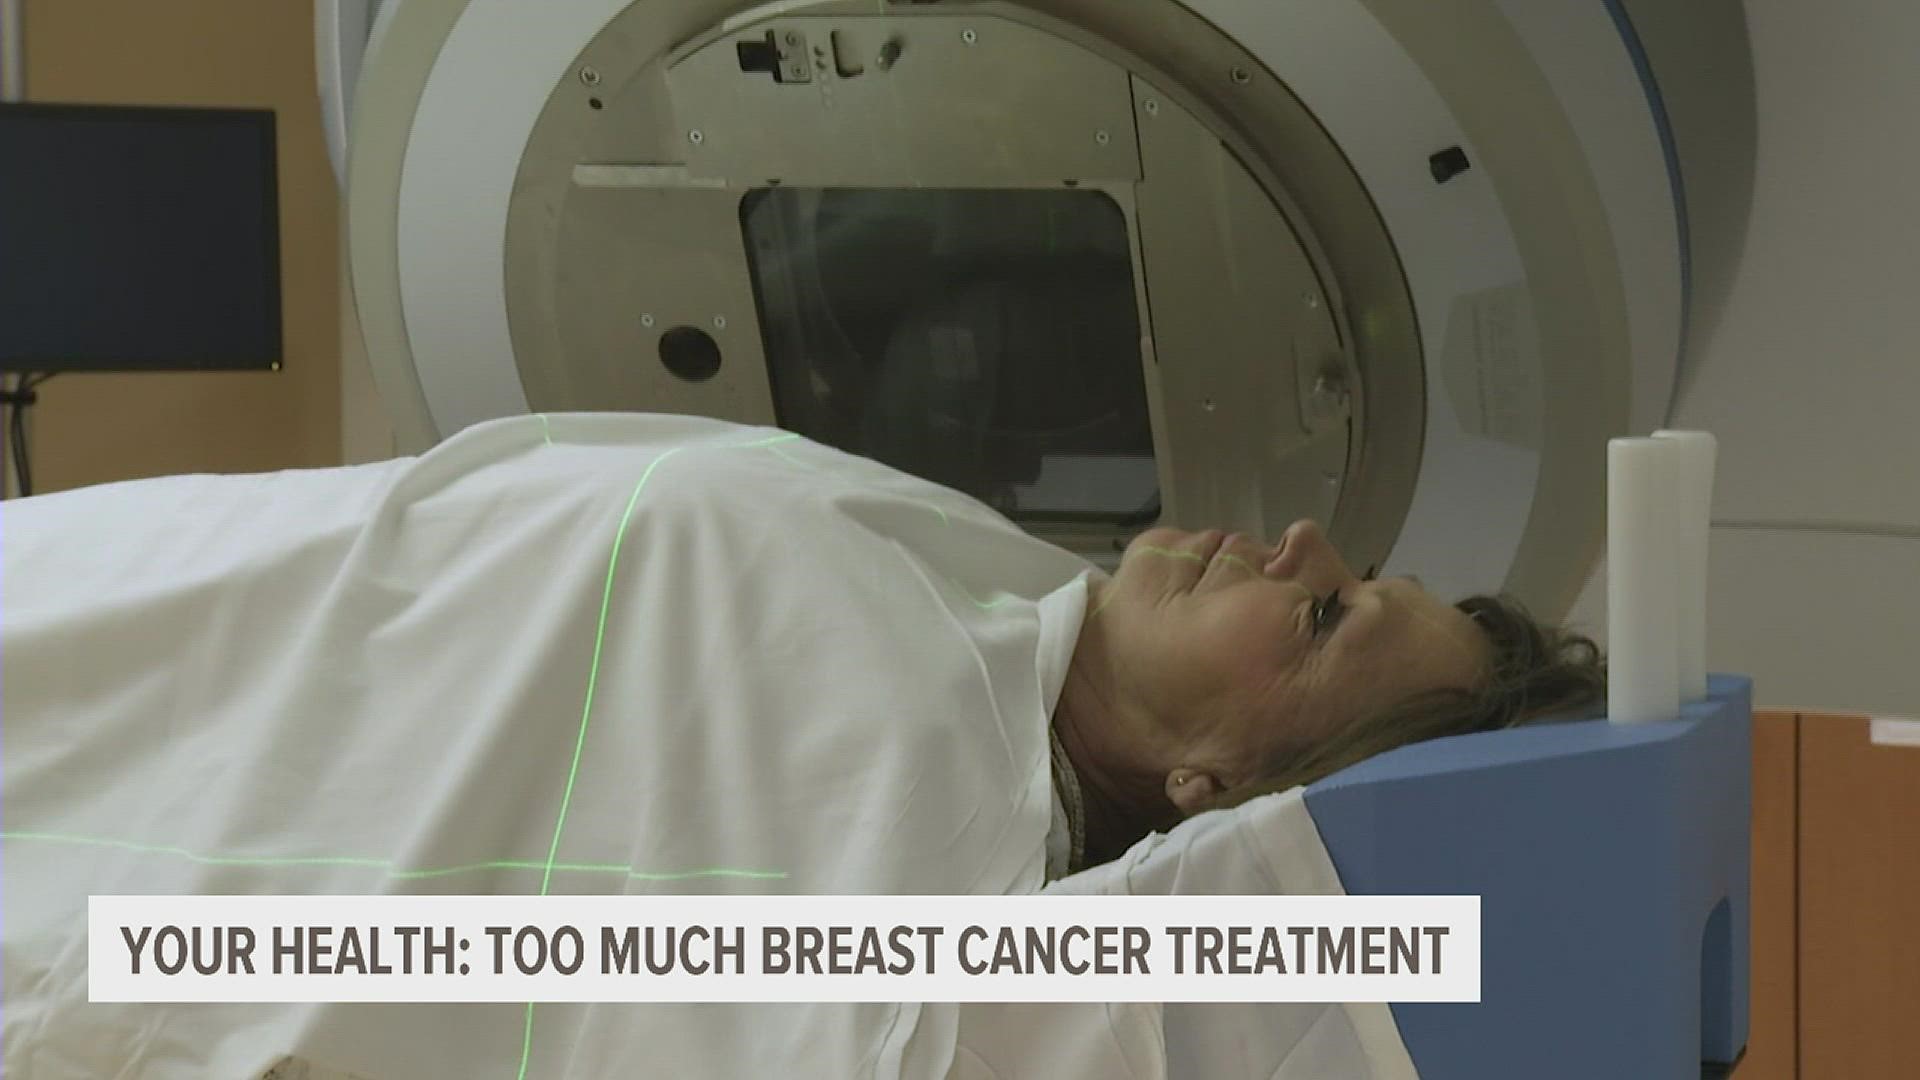 Treatments like radiation are designed to stop cancer from coming back. Now, researchers are studying the benefits of cutting back on certain treatments.